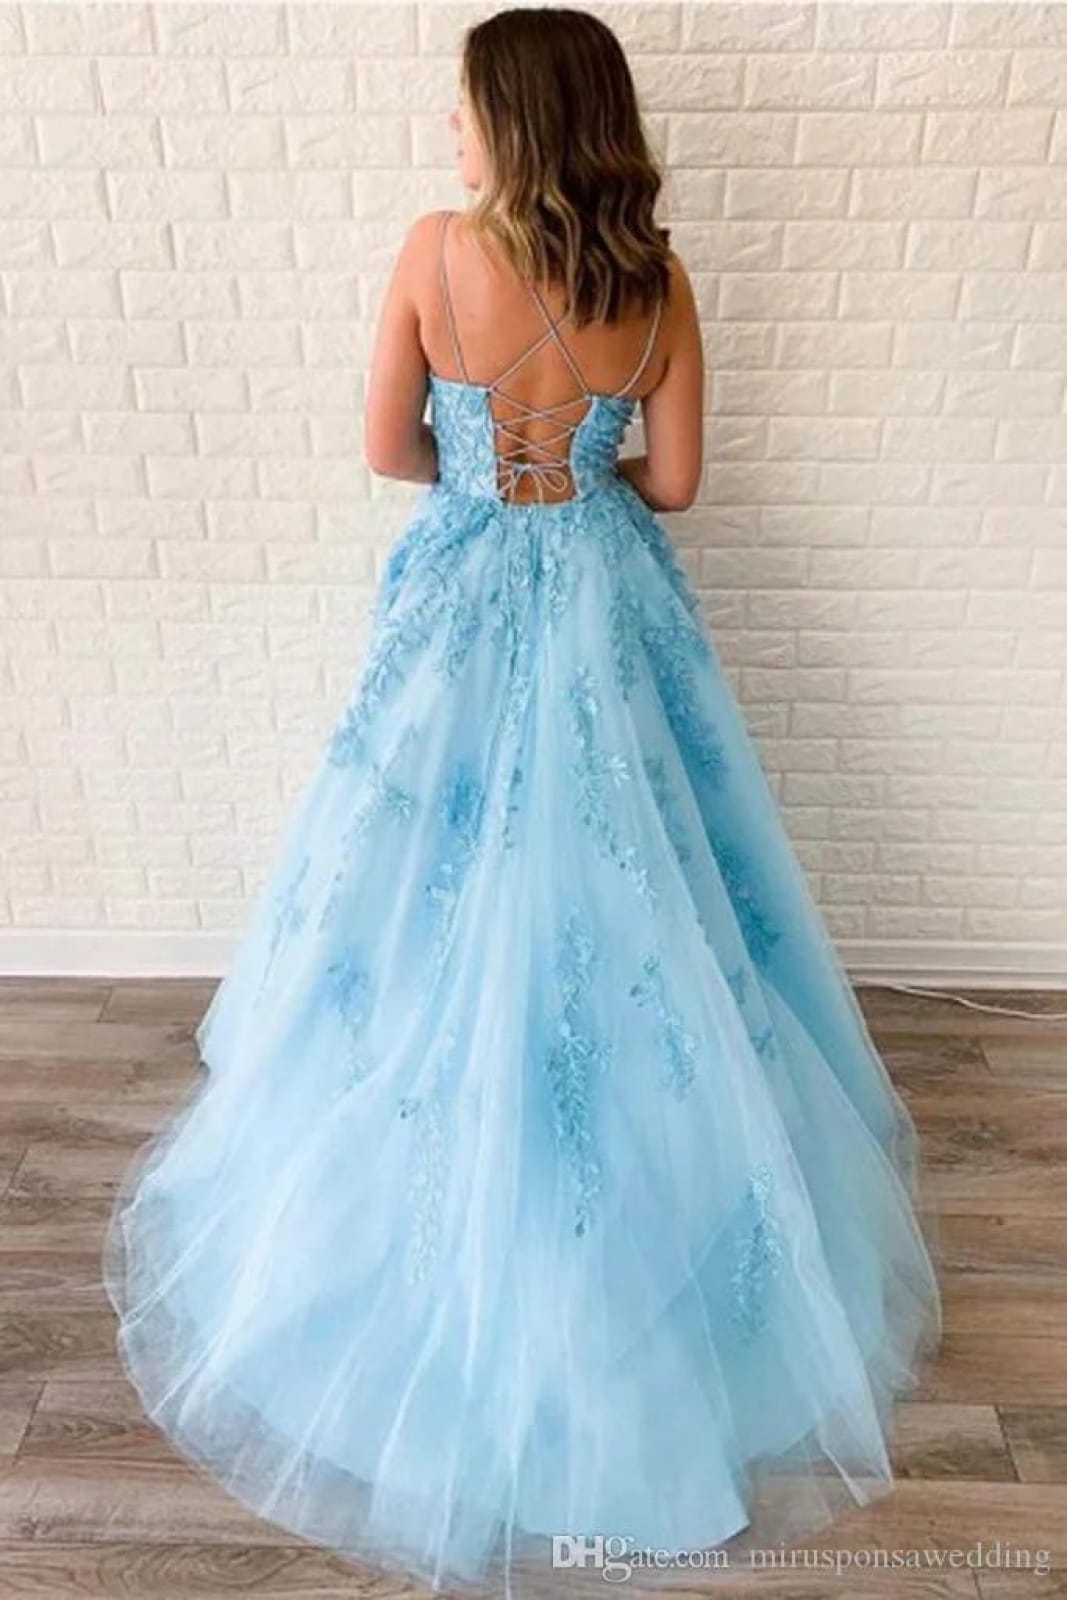 Ball Gown Lace Tulle Spaghetti Straps Crisscross Lace-up Court Train Prom Dress